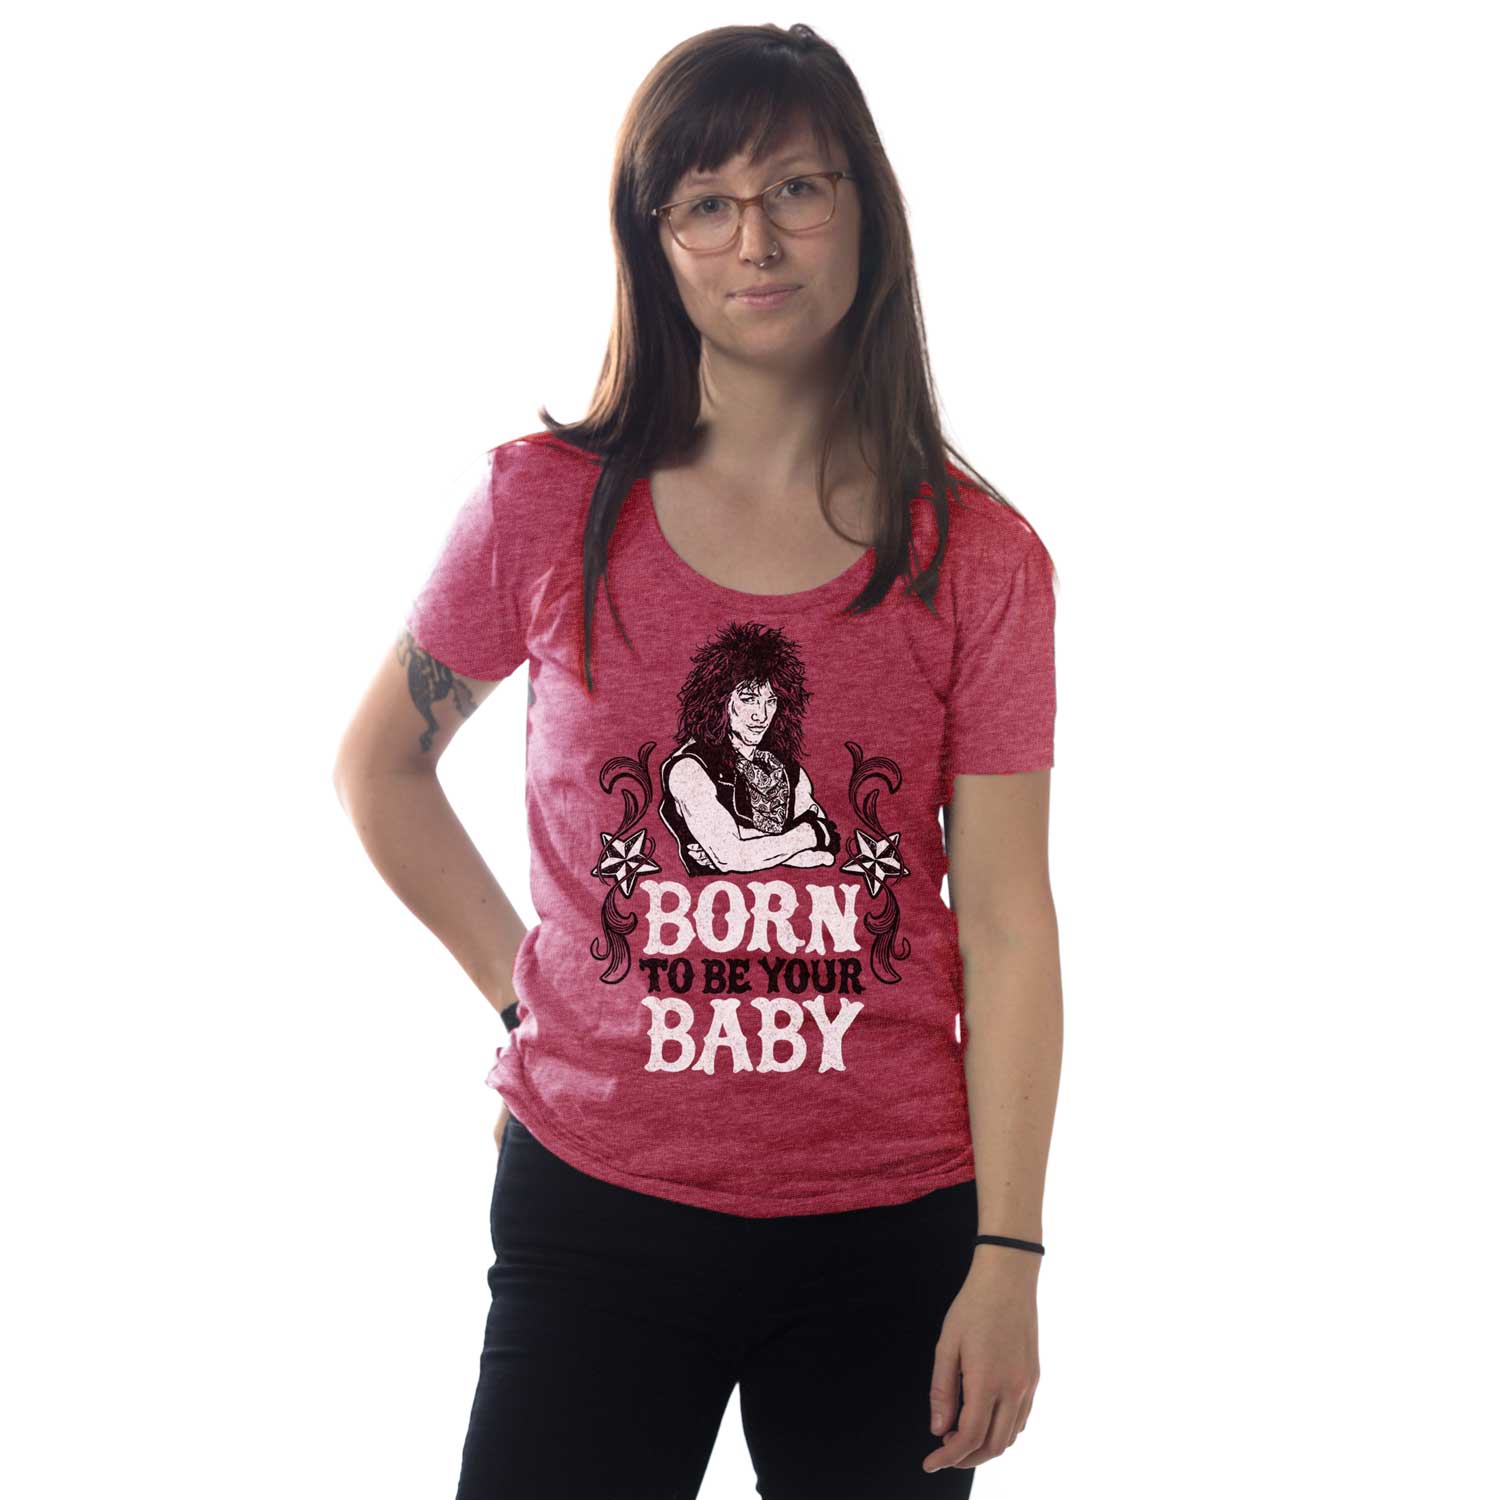 Women's Born To Be Your Baby Vintage Graphic Tee | Cool Bon Jovi T-shirt on Model | Solid Threads